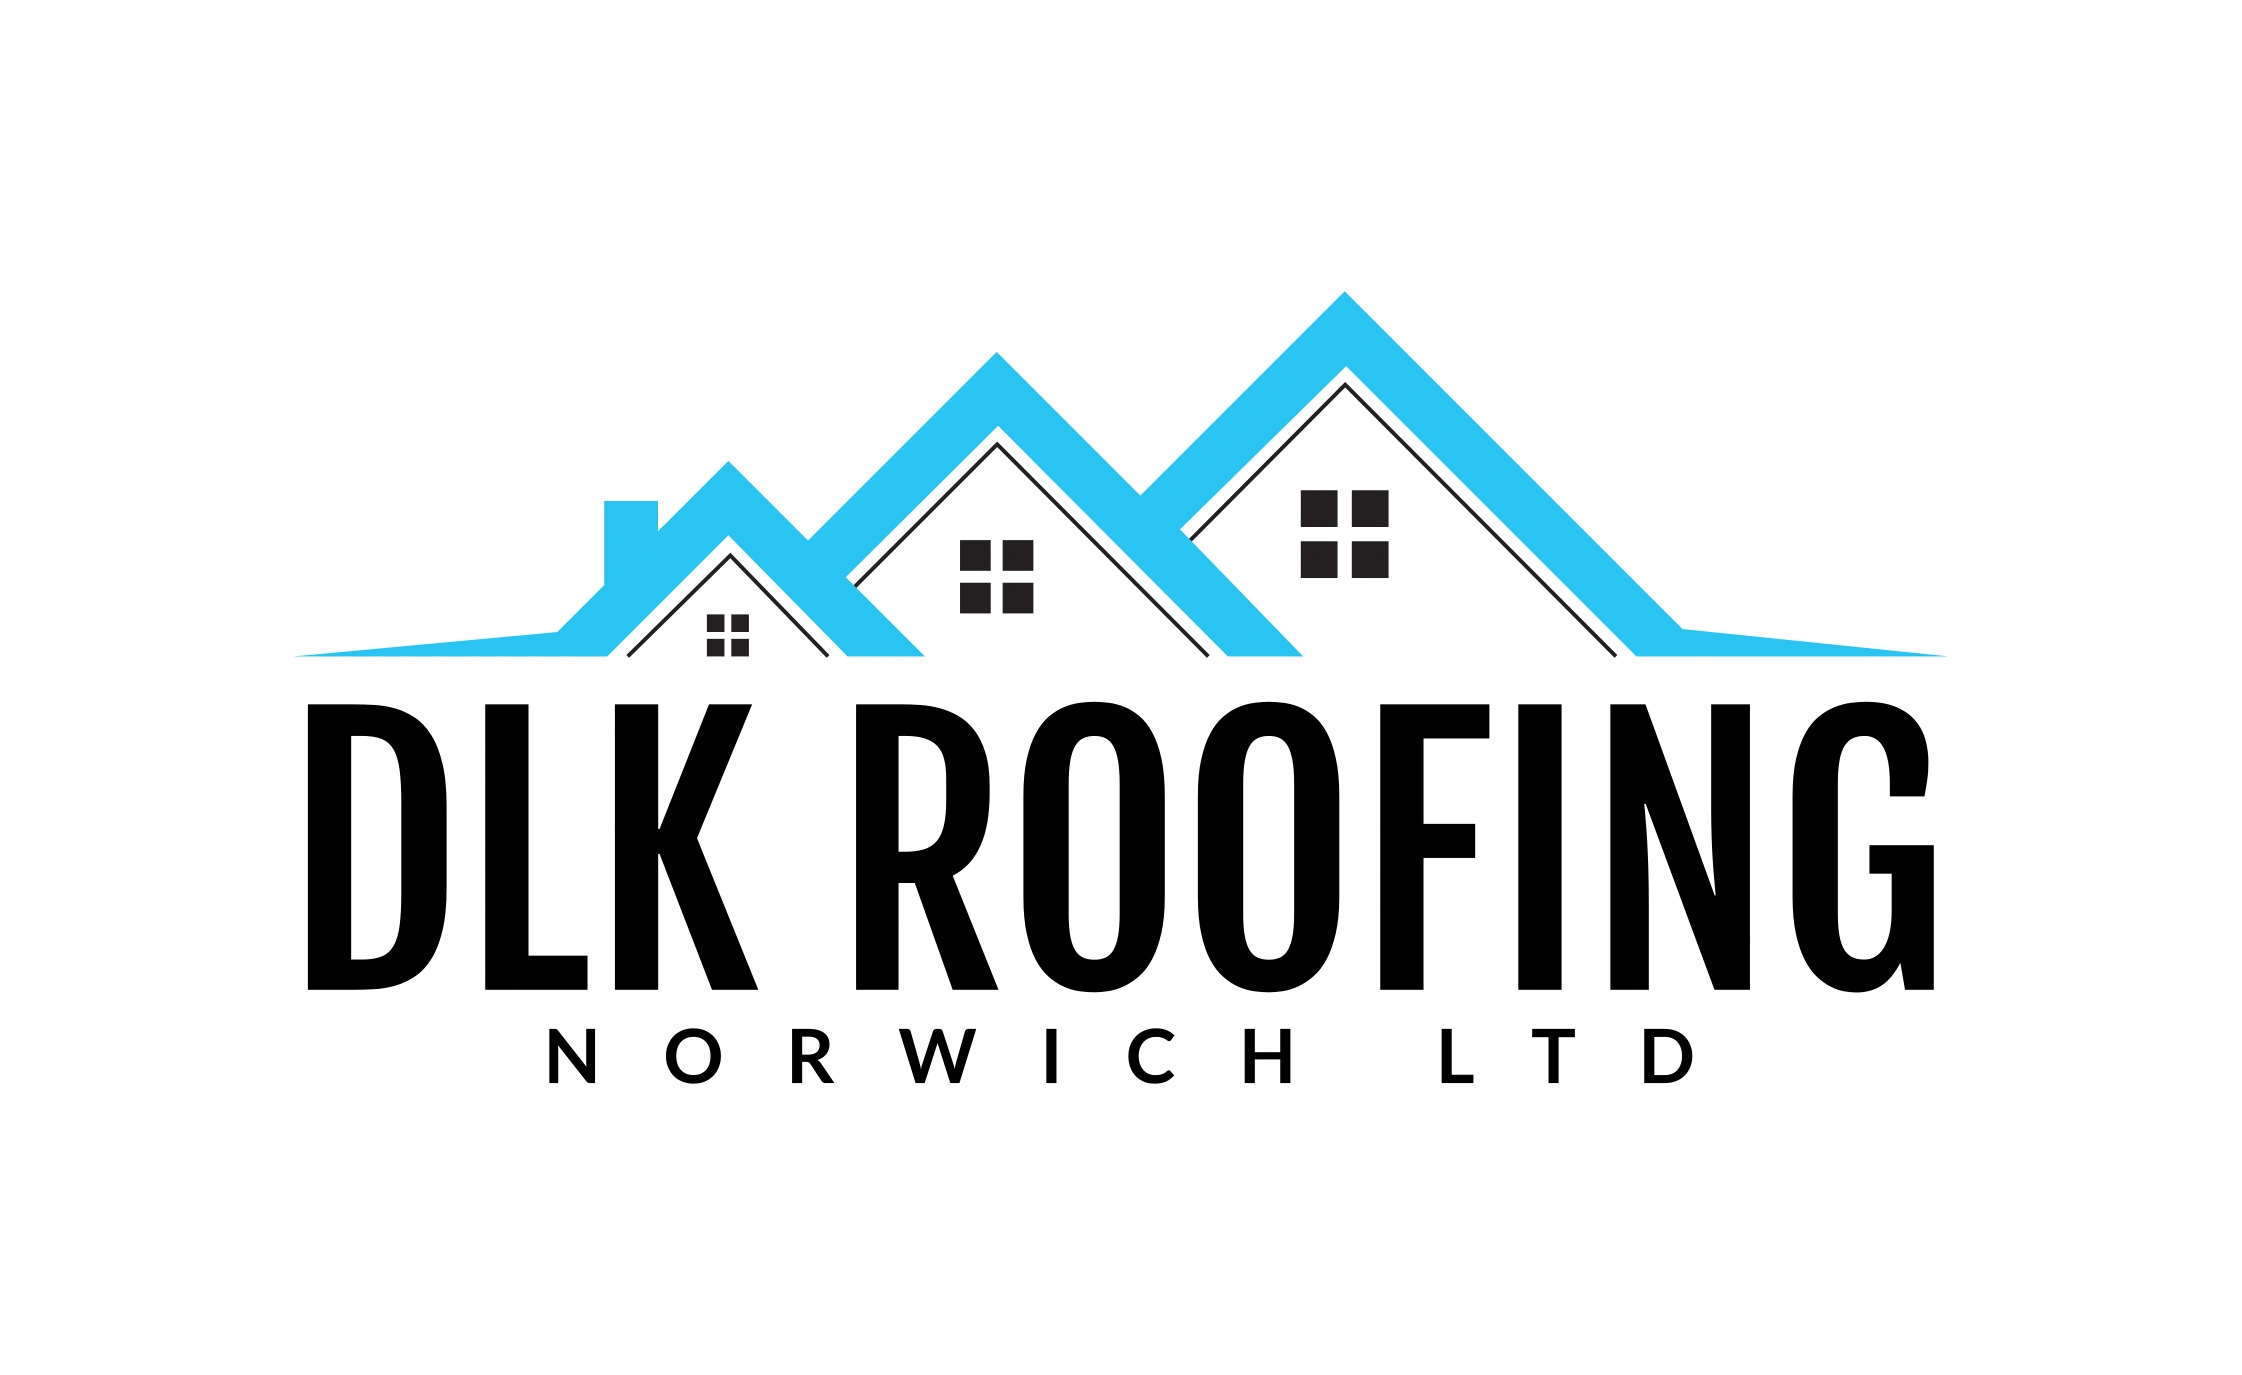 Dlk Roofing Norwich Ltd - a Norwich based roofing company covering Norfolk offering roof repairs 